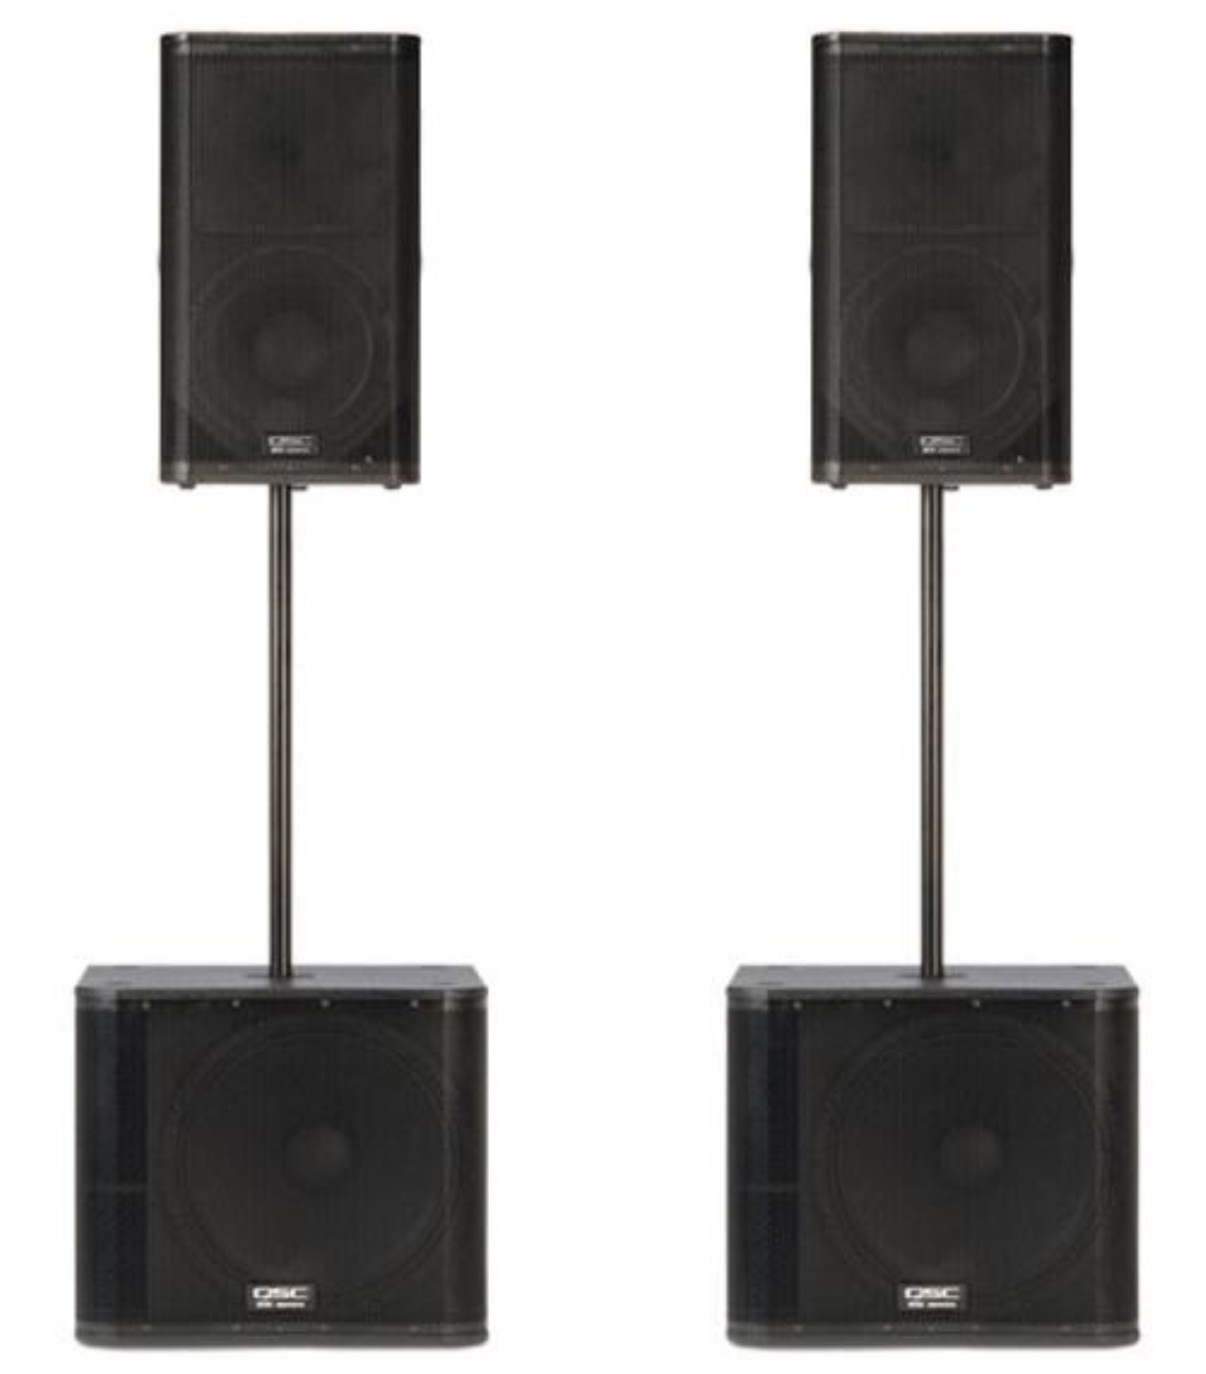 2 Powered Speakers & 2 Subwoofers Kit